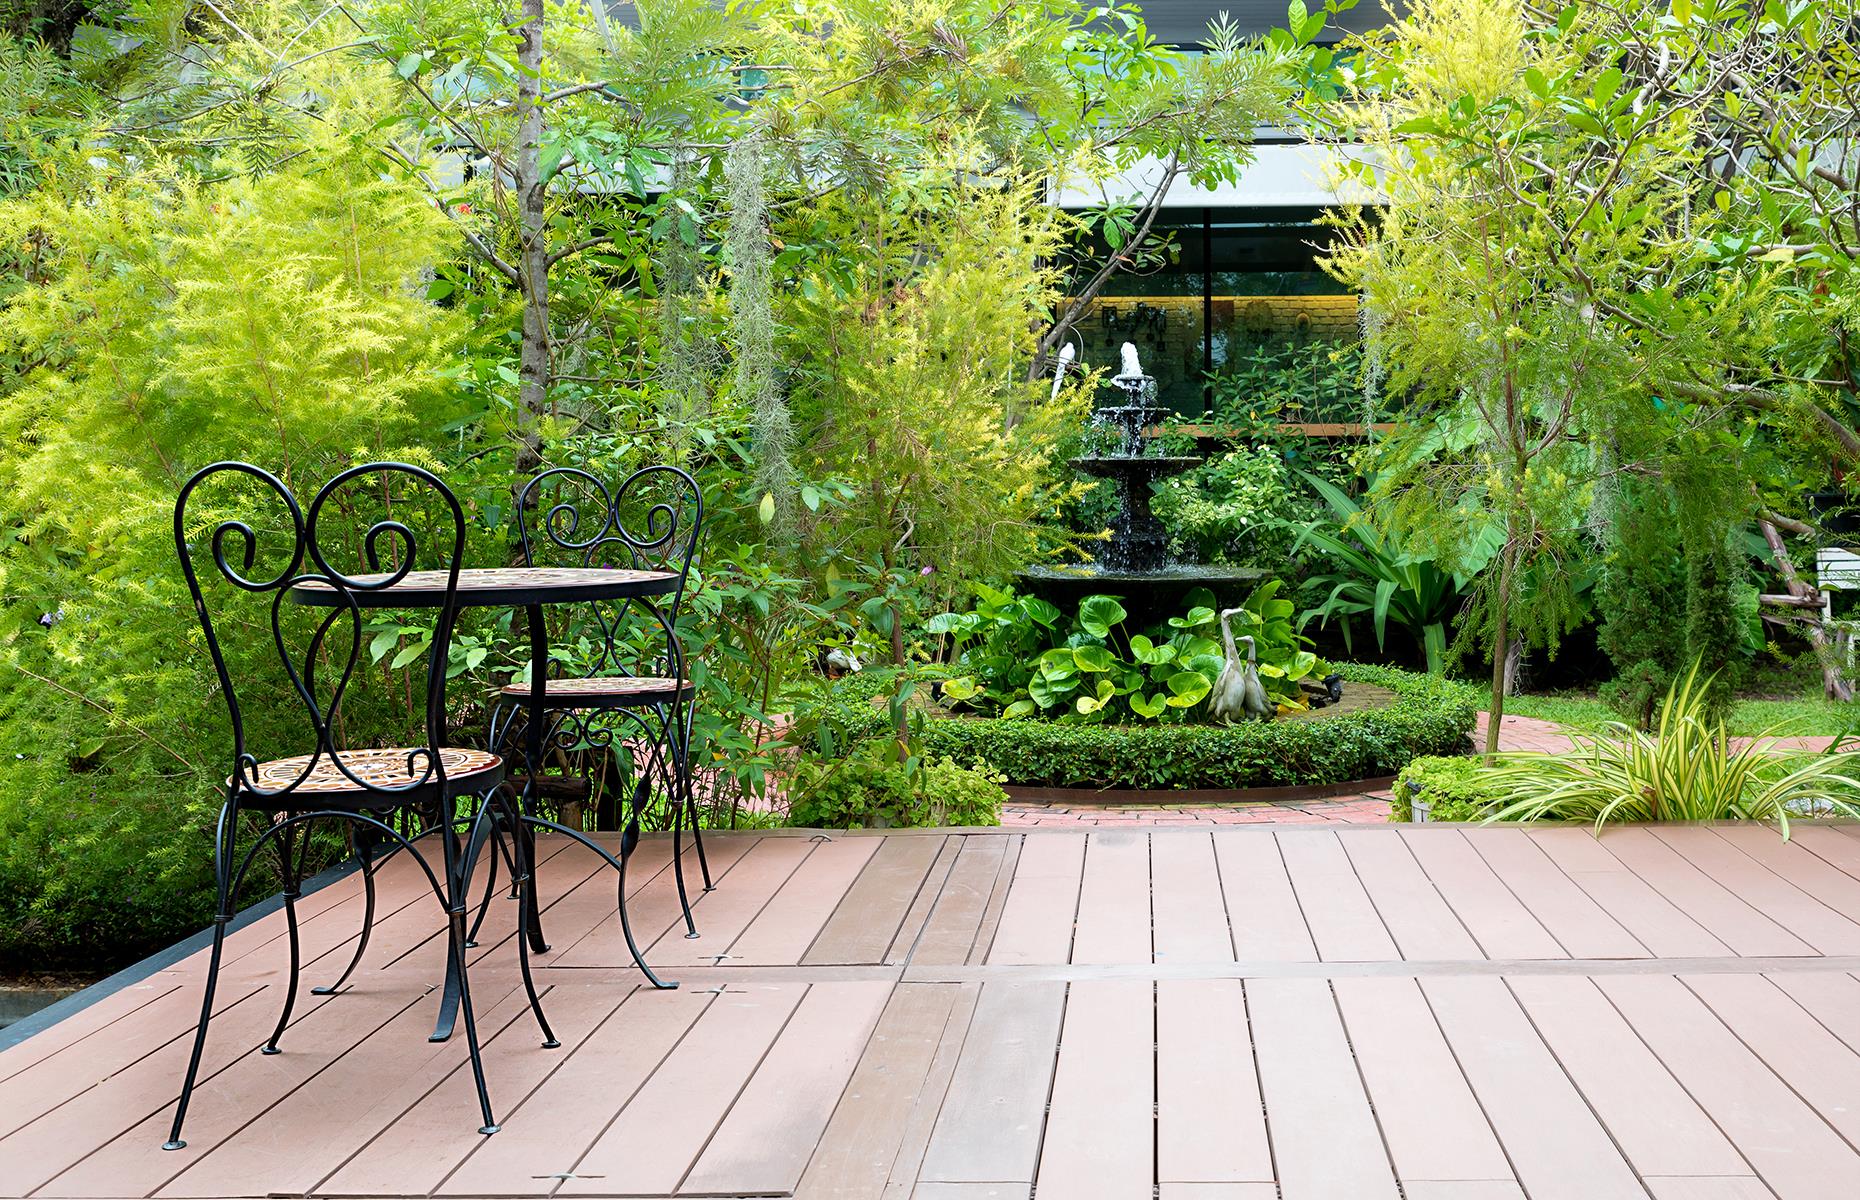 <p>Regardless of the size of your yard (<a href="https://www.loveproperty.com/gallerylist/71425/stylish-but-simple-small-garden-ideas">small can be just as beautiful</a>), a manicured section you can enjoy in good weather is a must-have. Even just a few flowers or veggies planted in beds or a display of potted plants make it into a place where you want to spend time and relax.</p>